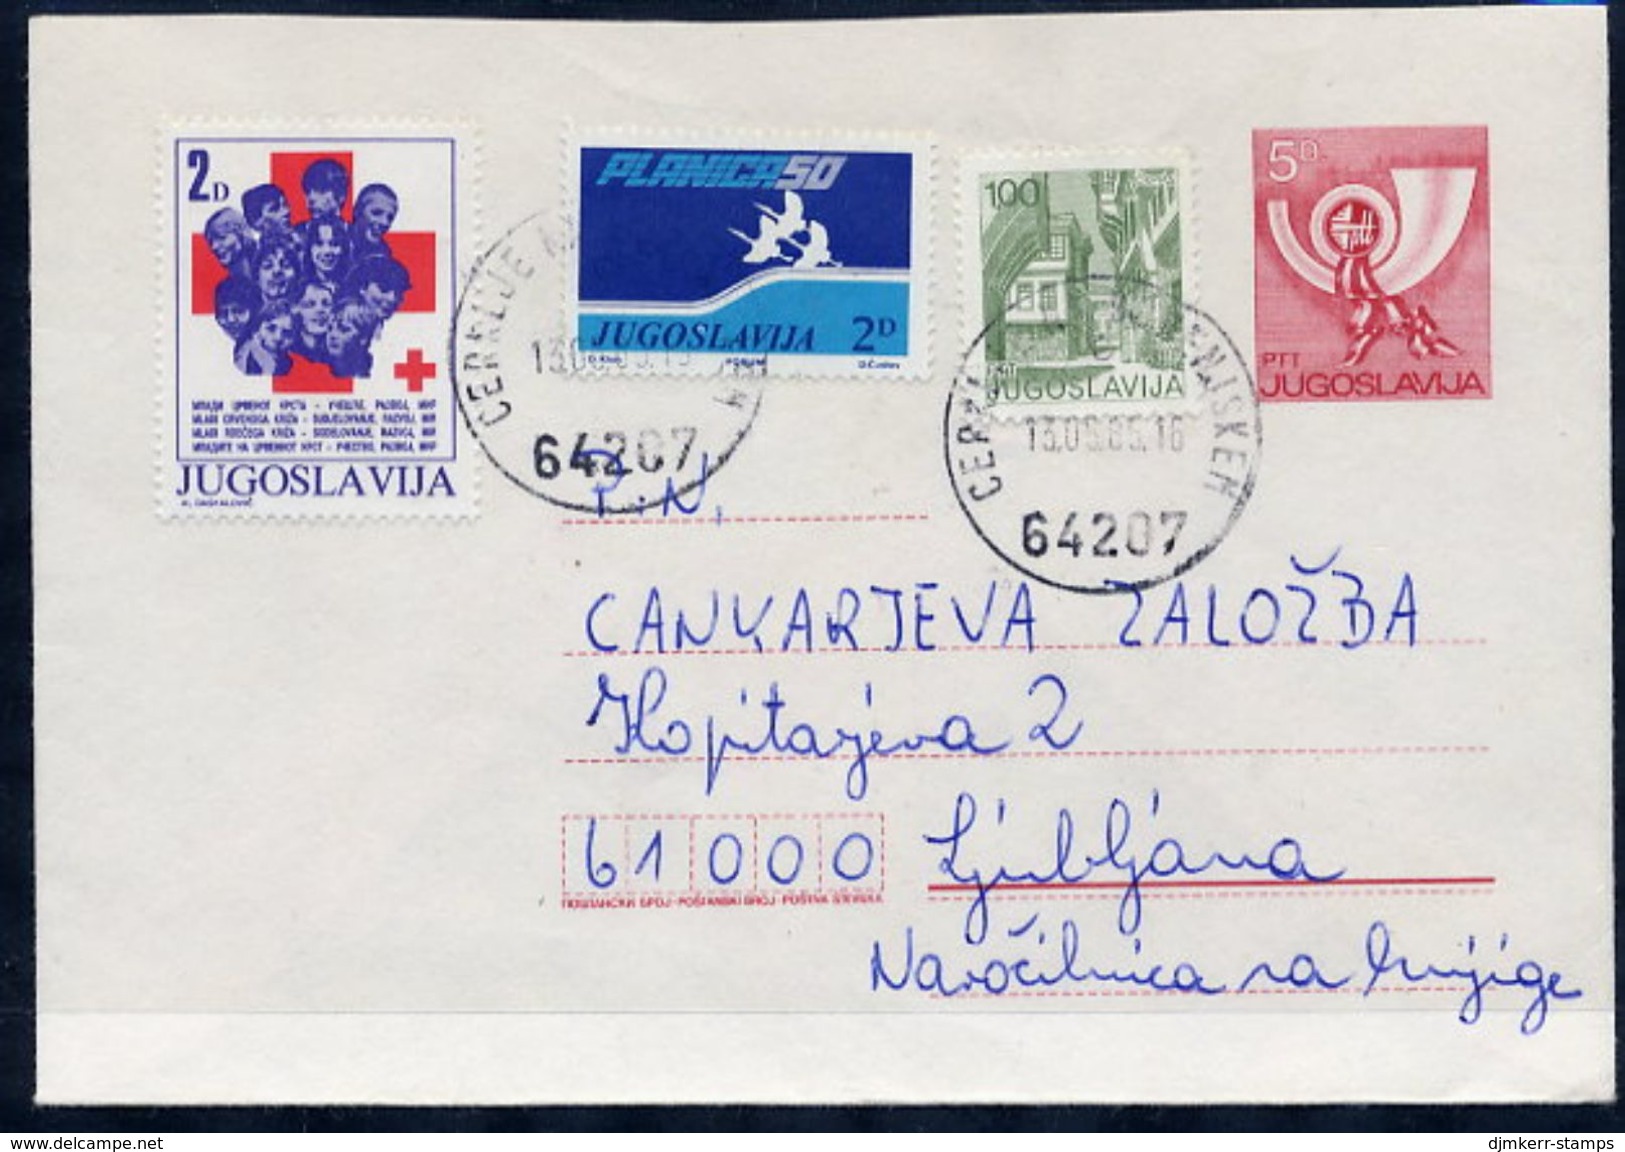 YUGOSLAVIA 1983 Posthorn 5 D.stationery Envelope Used With Additional Franking And Two Tax Stamps  Michel U72 - Postal Stationery